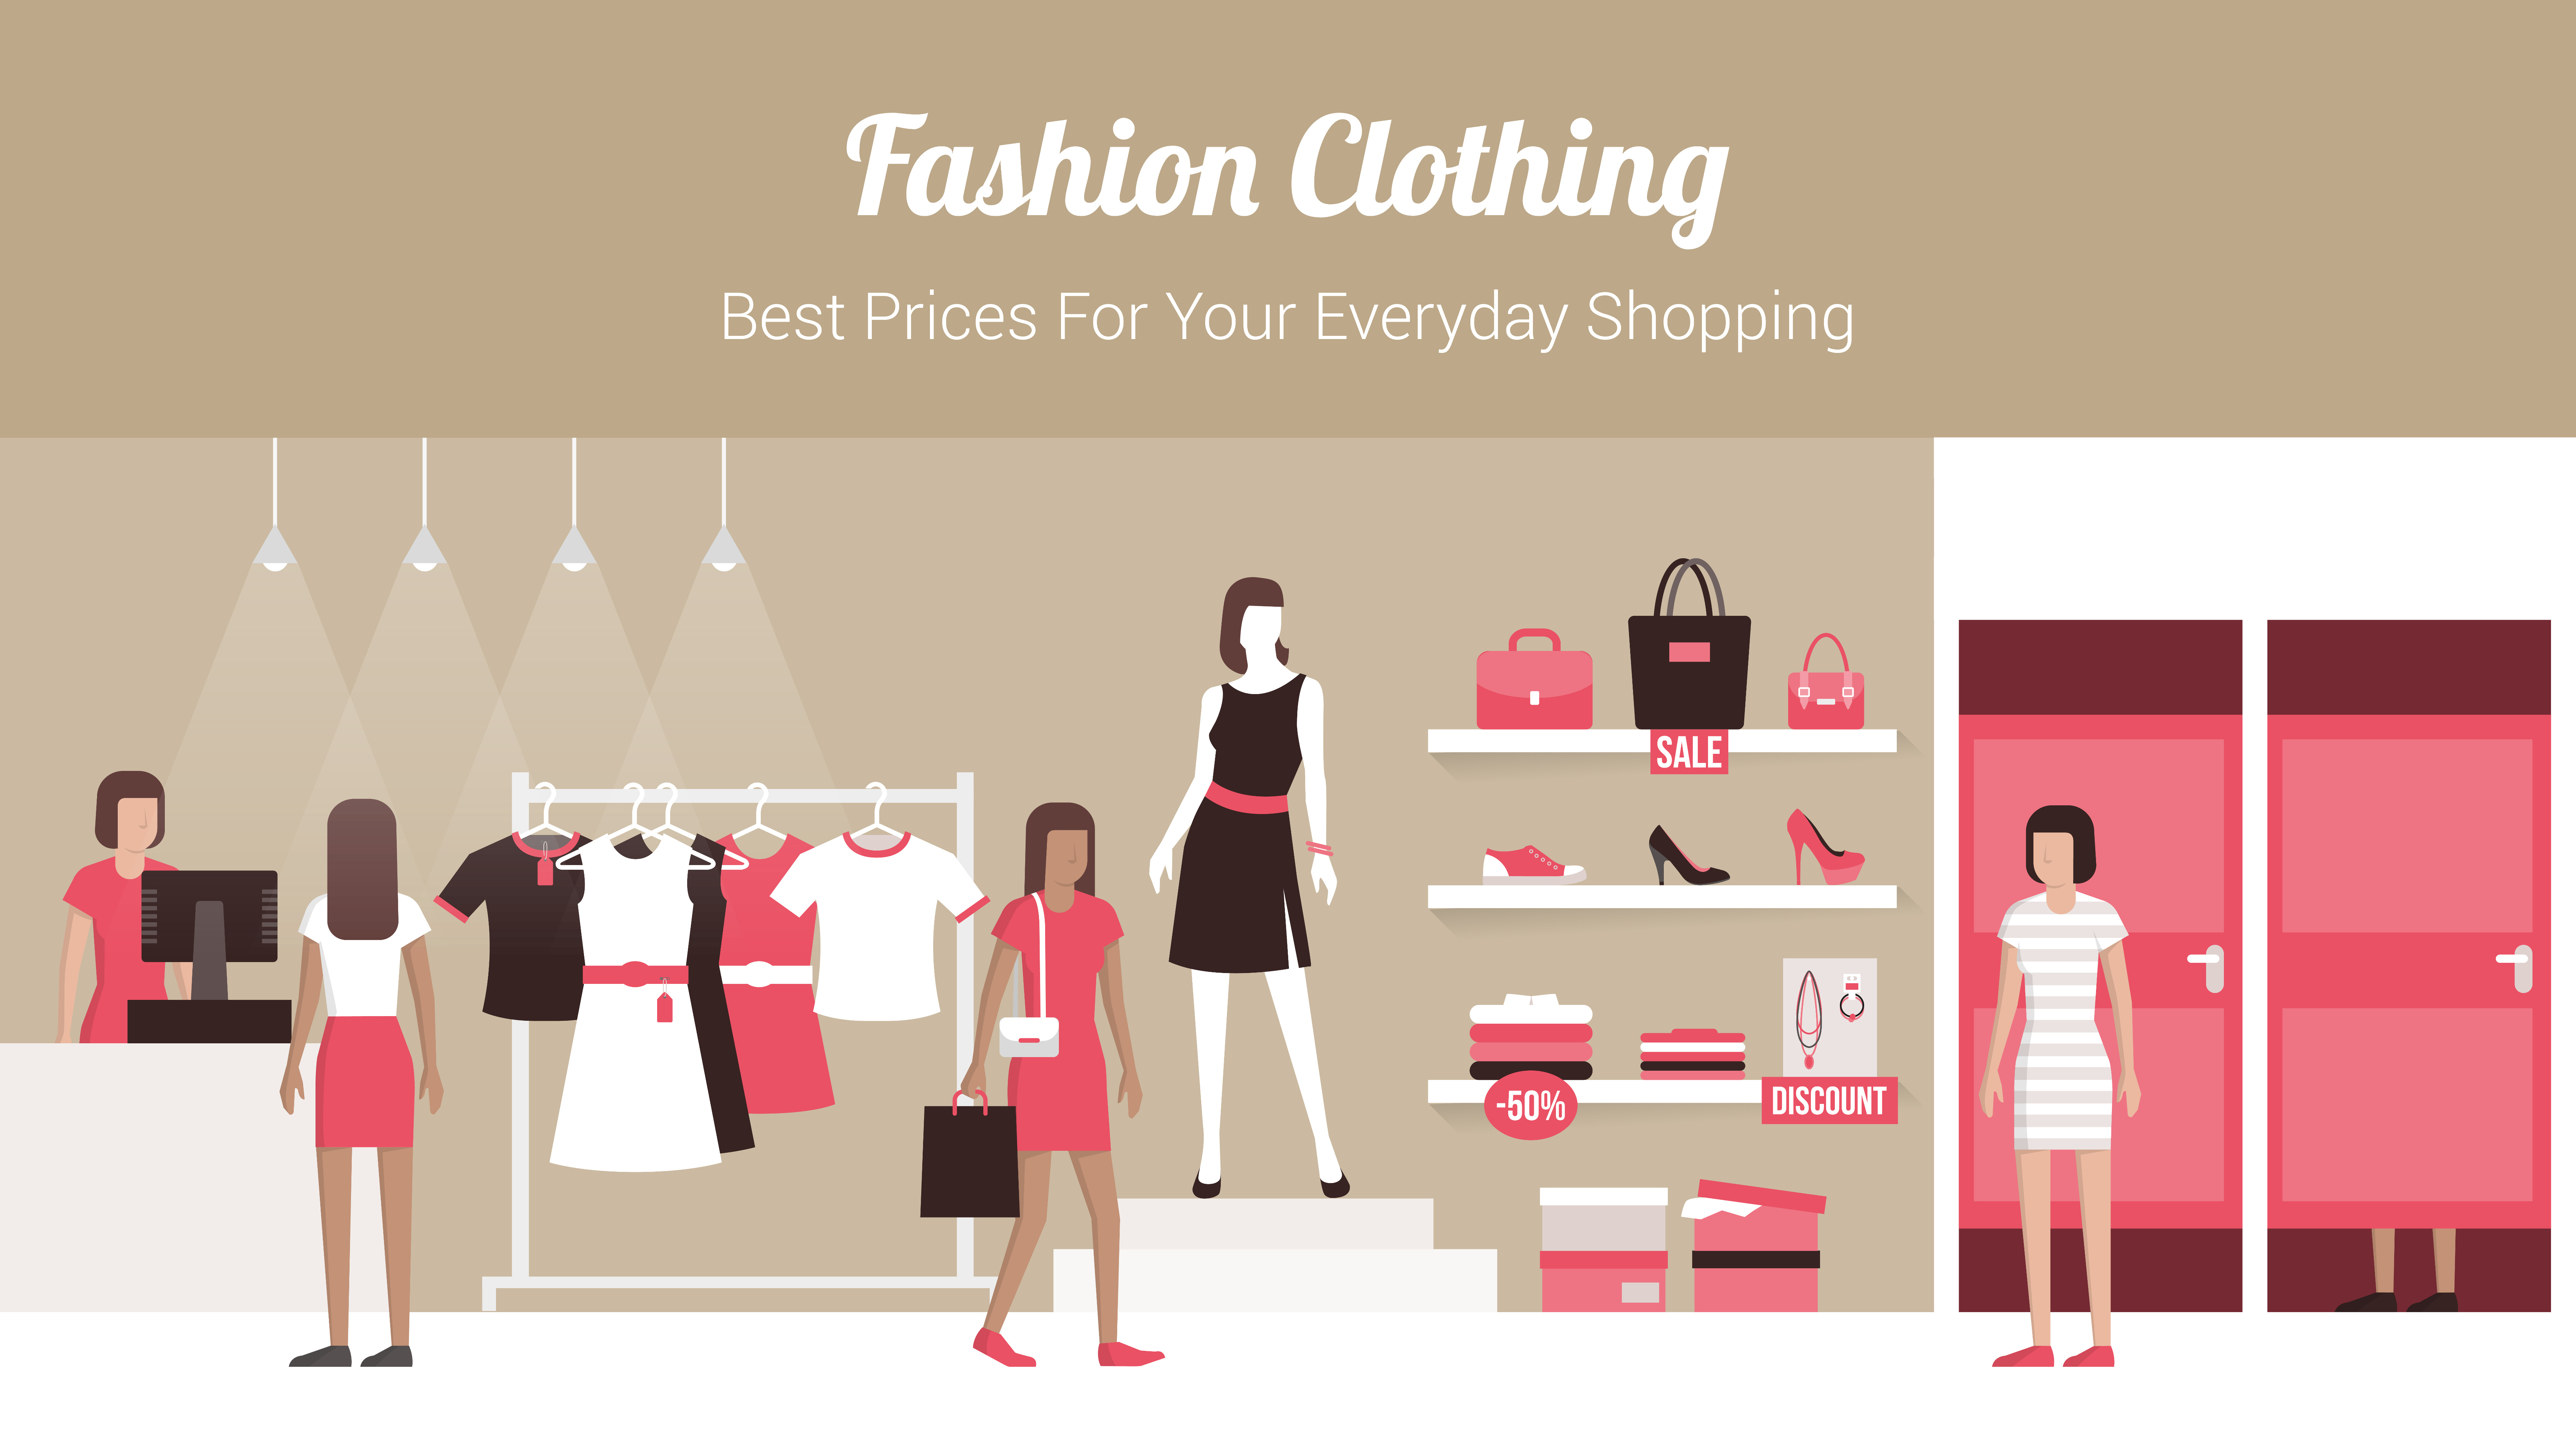 Fashion clothing store banner with shop interior, clothing on hangers and shelves, fitting rooms and customers buying products